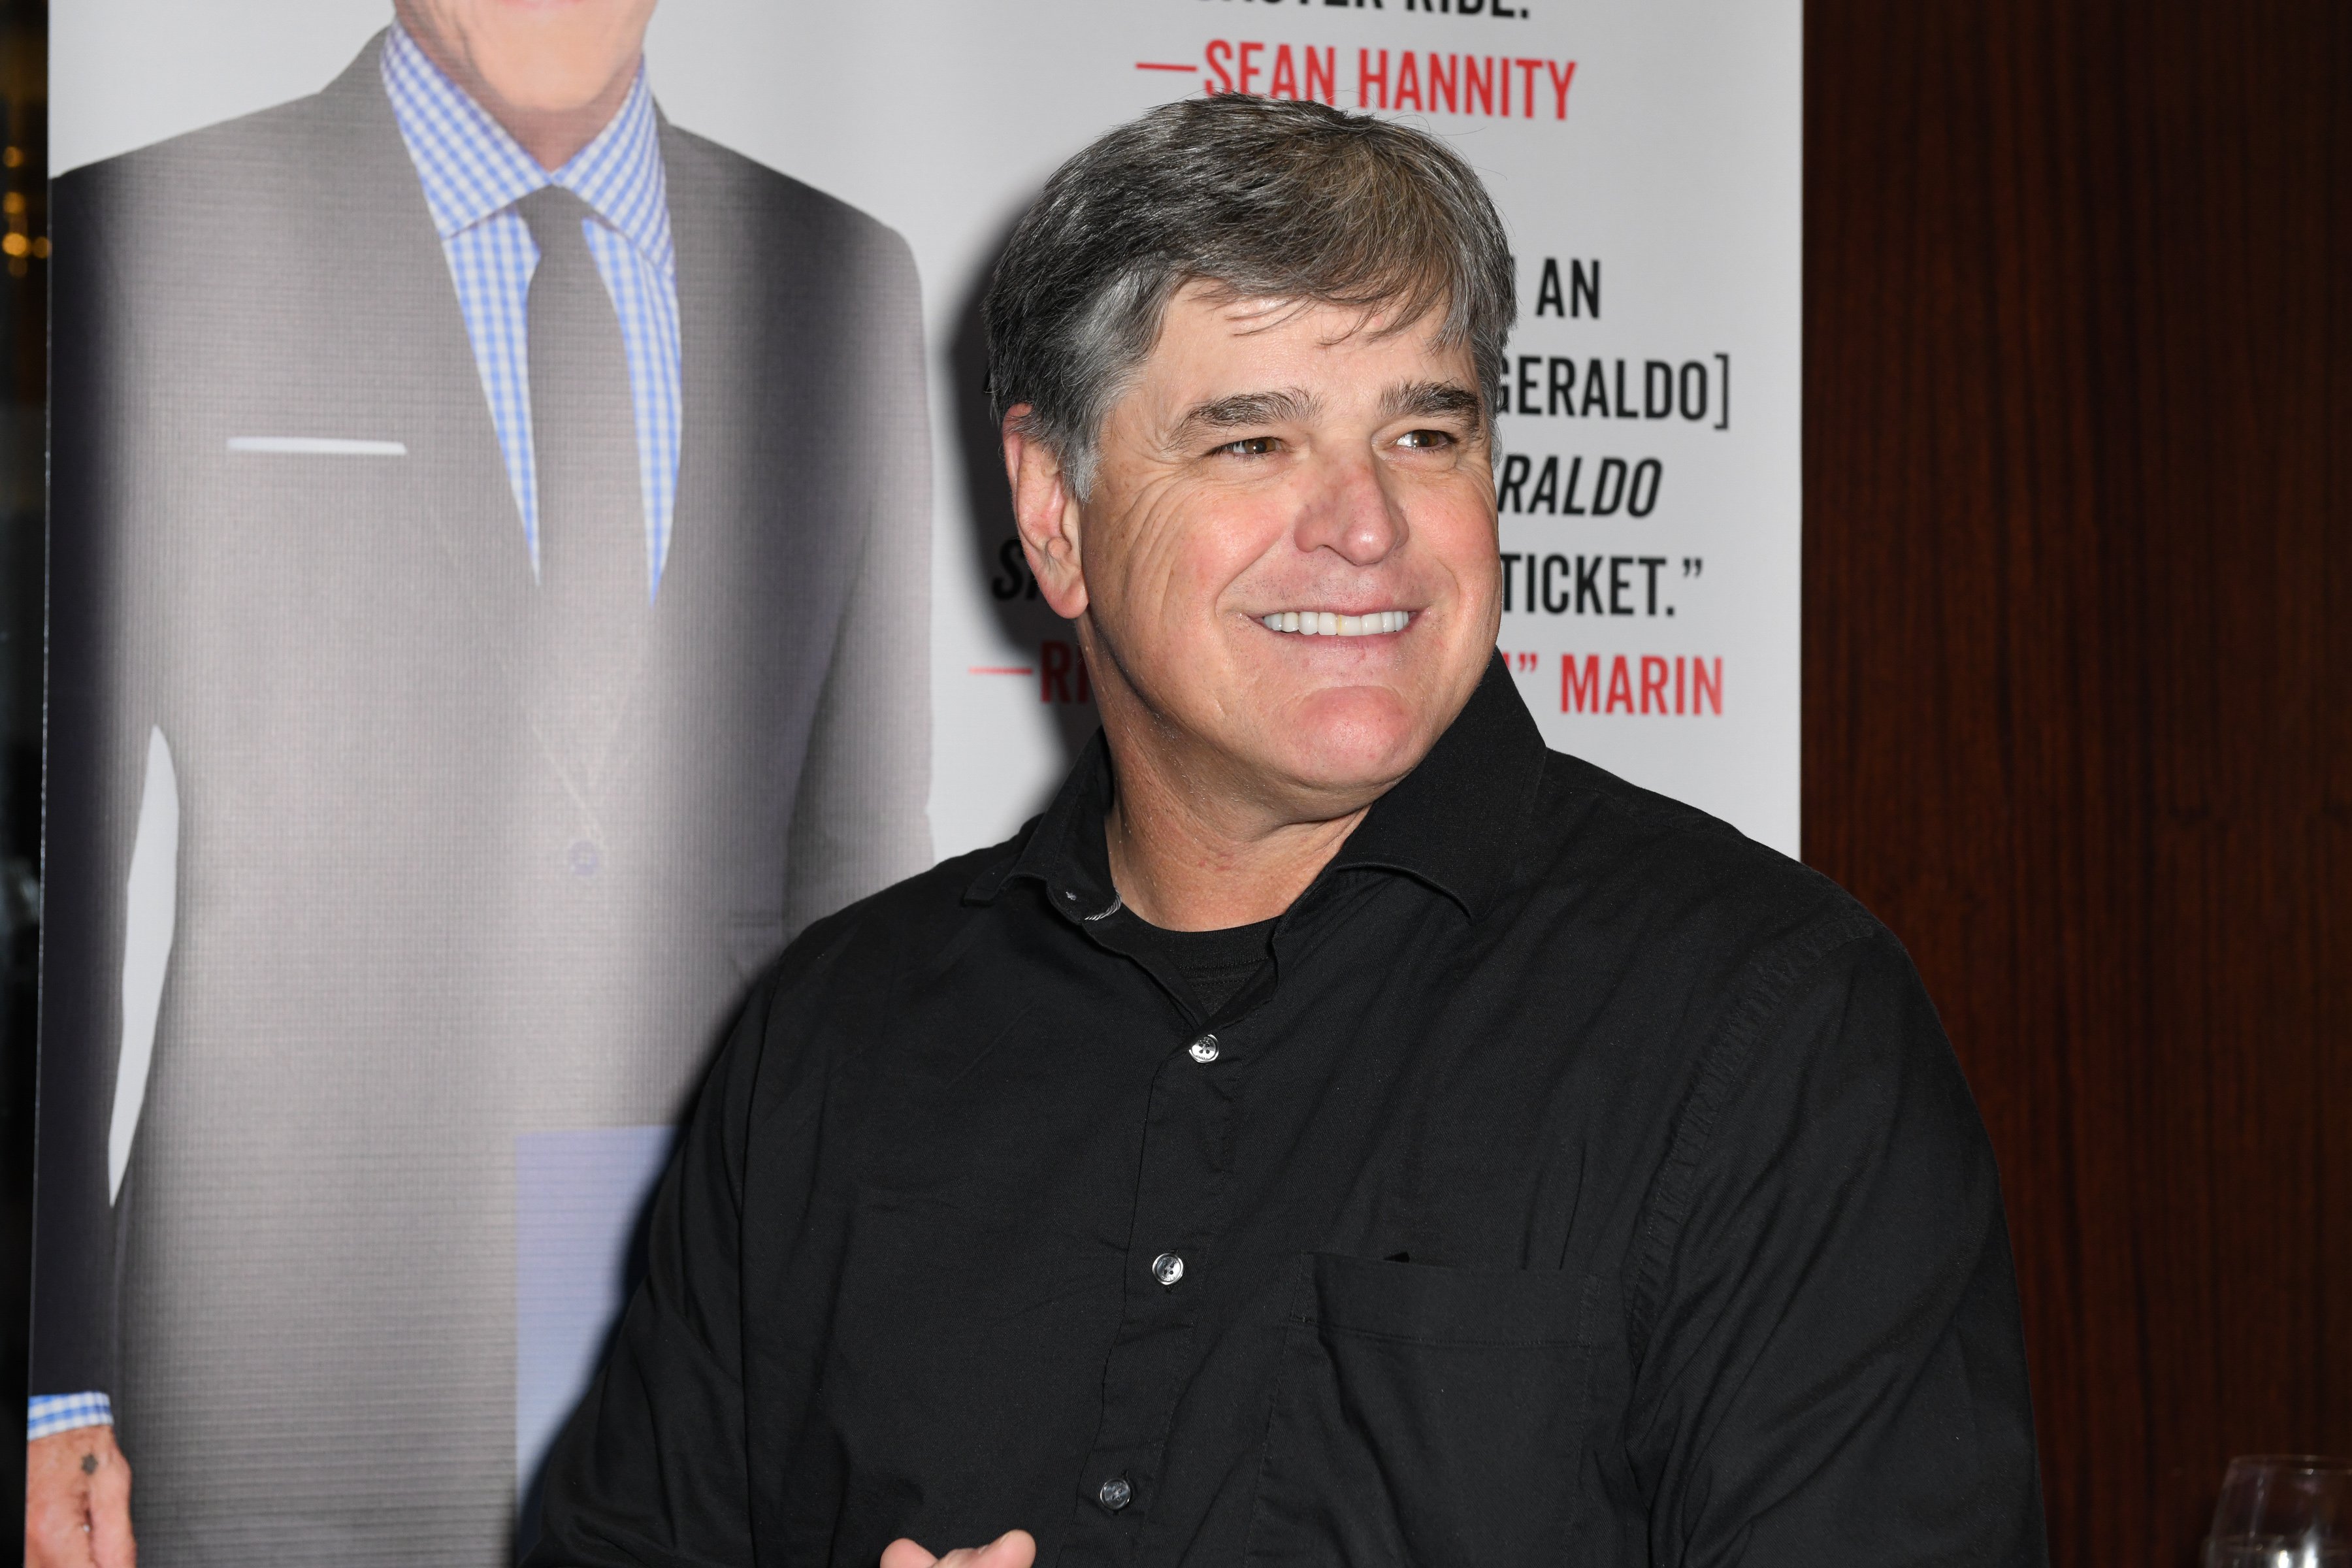 Sean Hannity attends Sean Hannity & Friends celebrate the publication of "The Geraldo Show: A Memoir" at Del Frisco's on April 2, 2018 in New York City. | Source: Getty Images